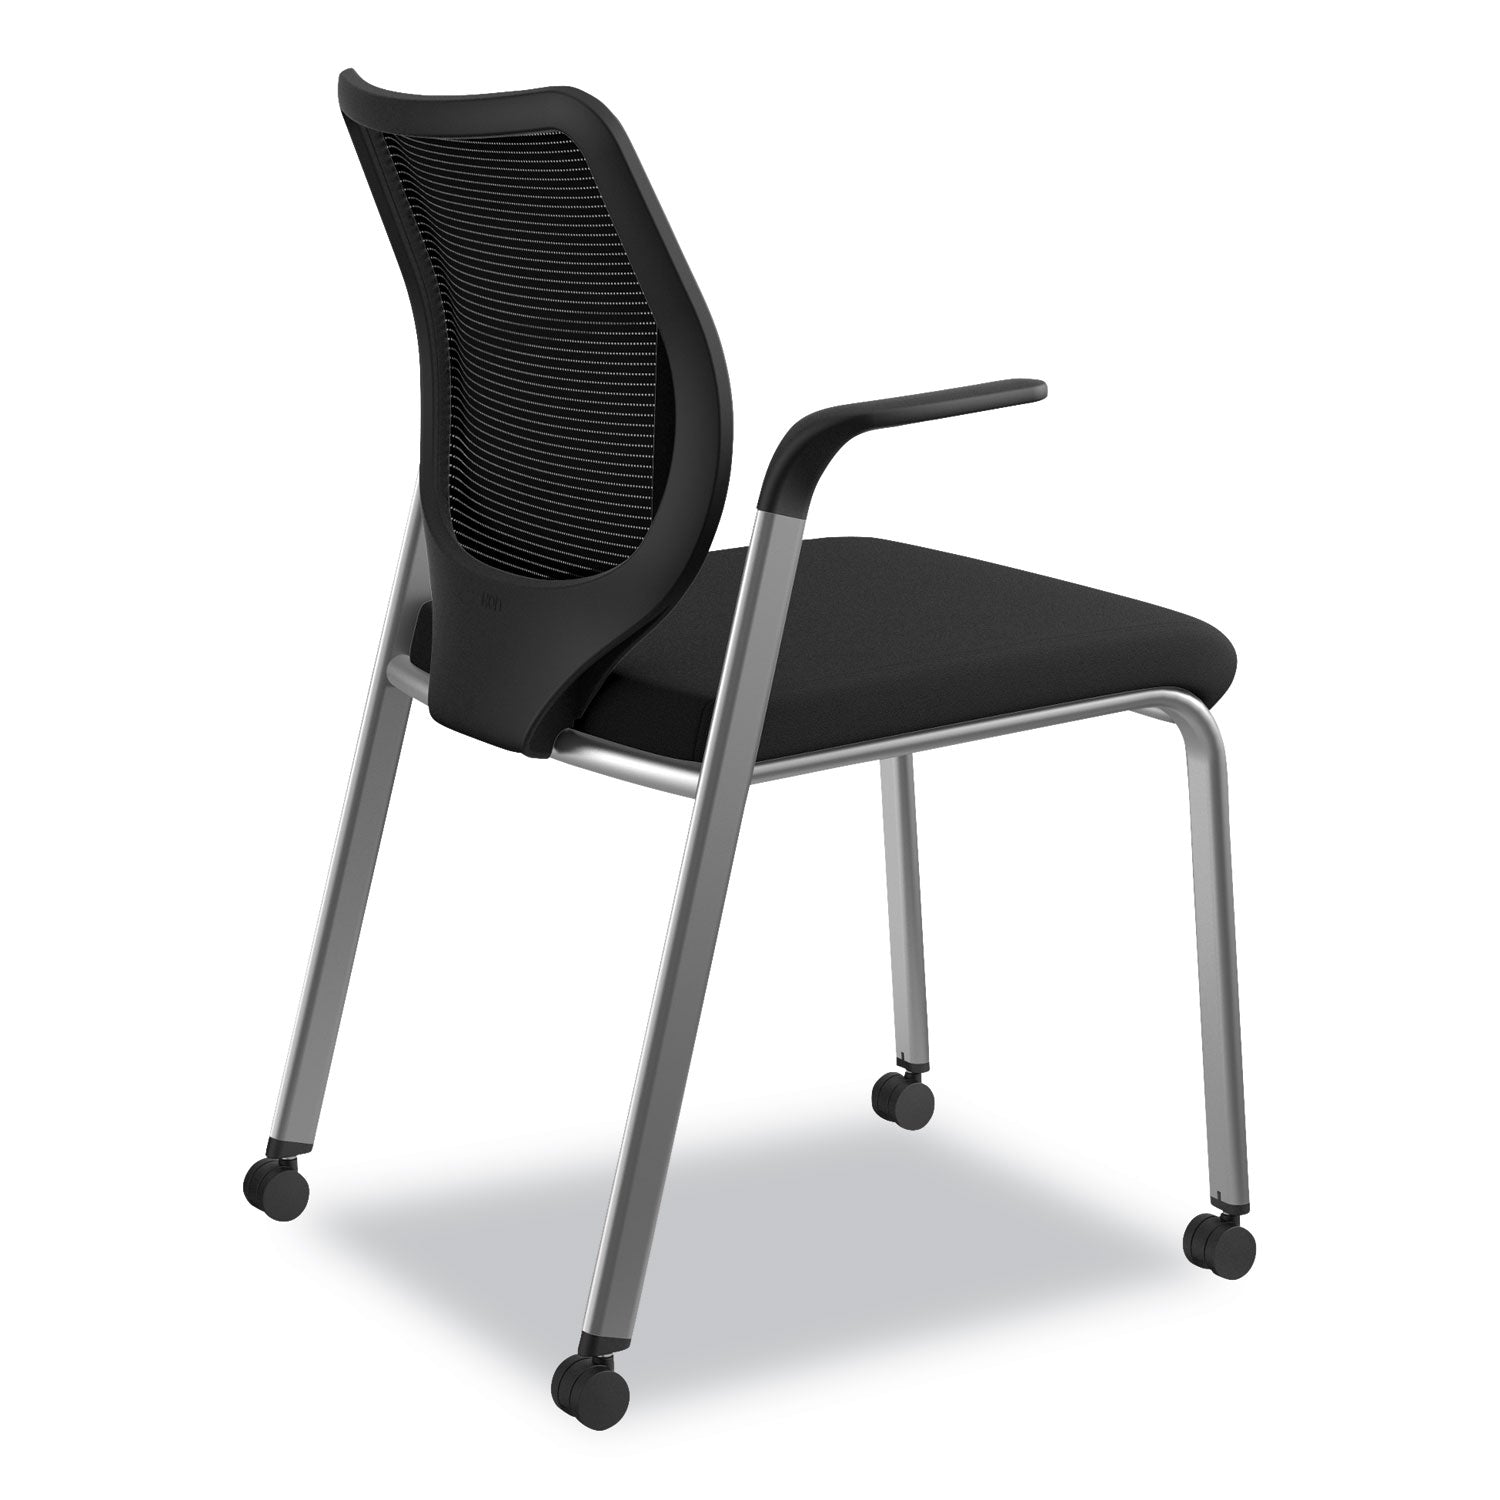 nucleus-series-multipurpose-stacking-chair-with-ilira-stretch-m4-back-supports-up-to-300-lb-black-seat-back-platinum-base_honn606hcu10t1 - 5